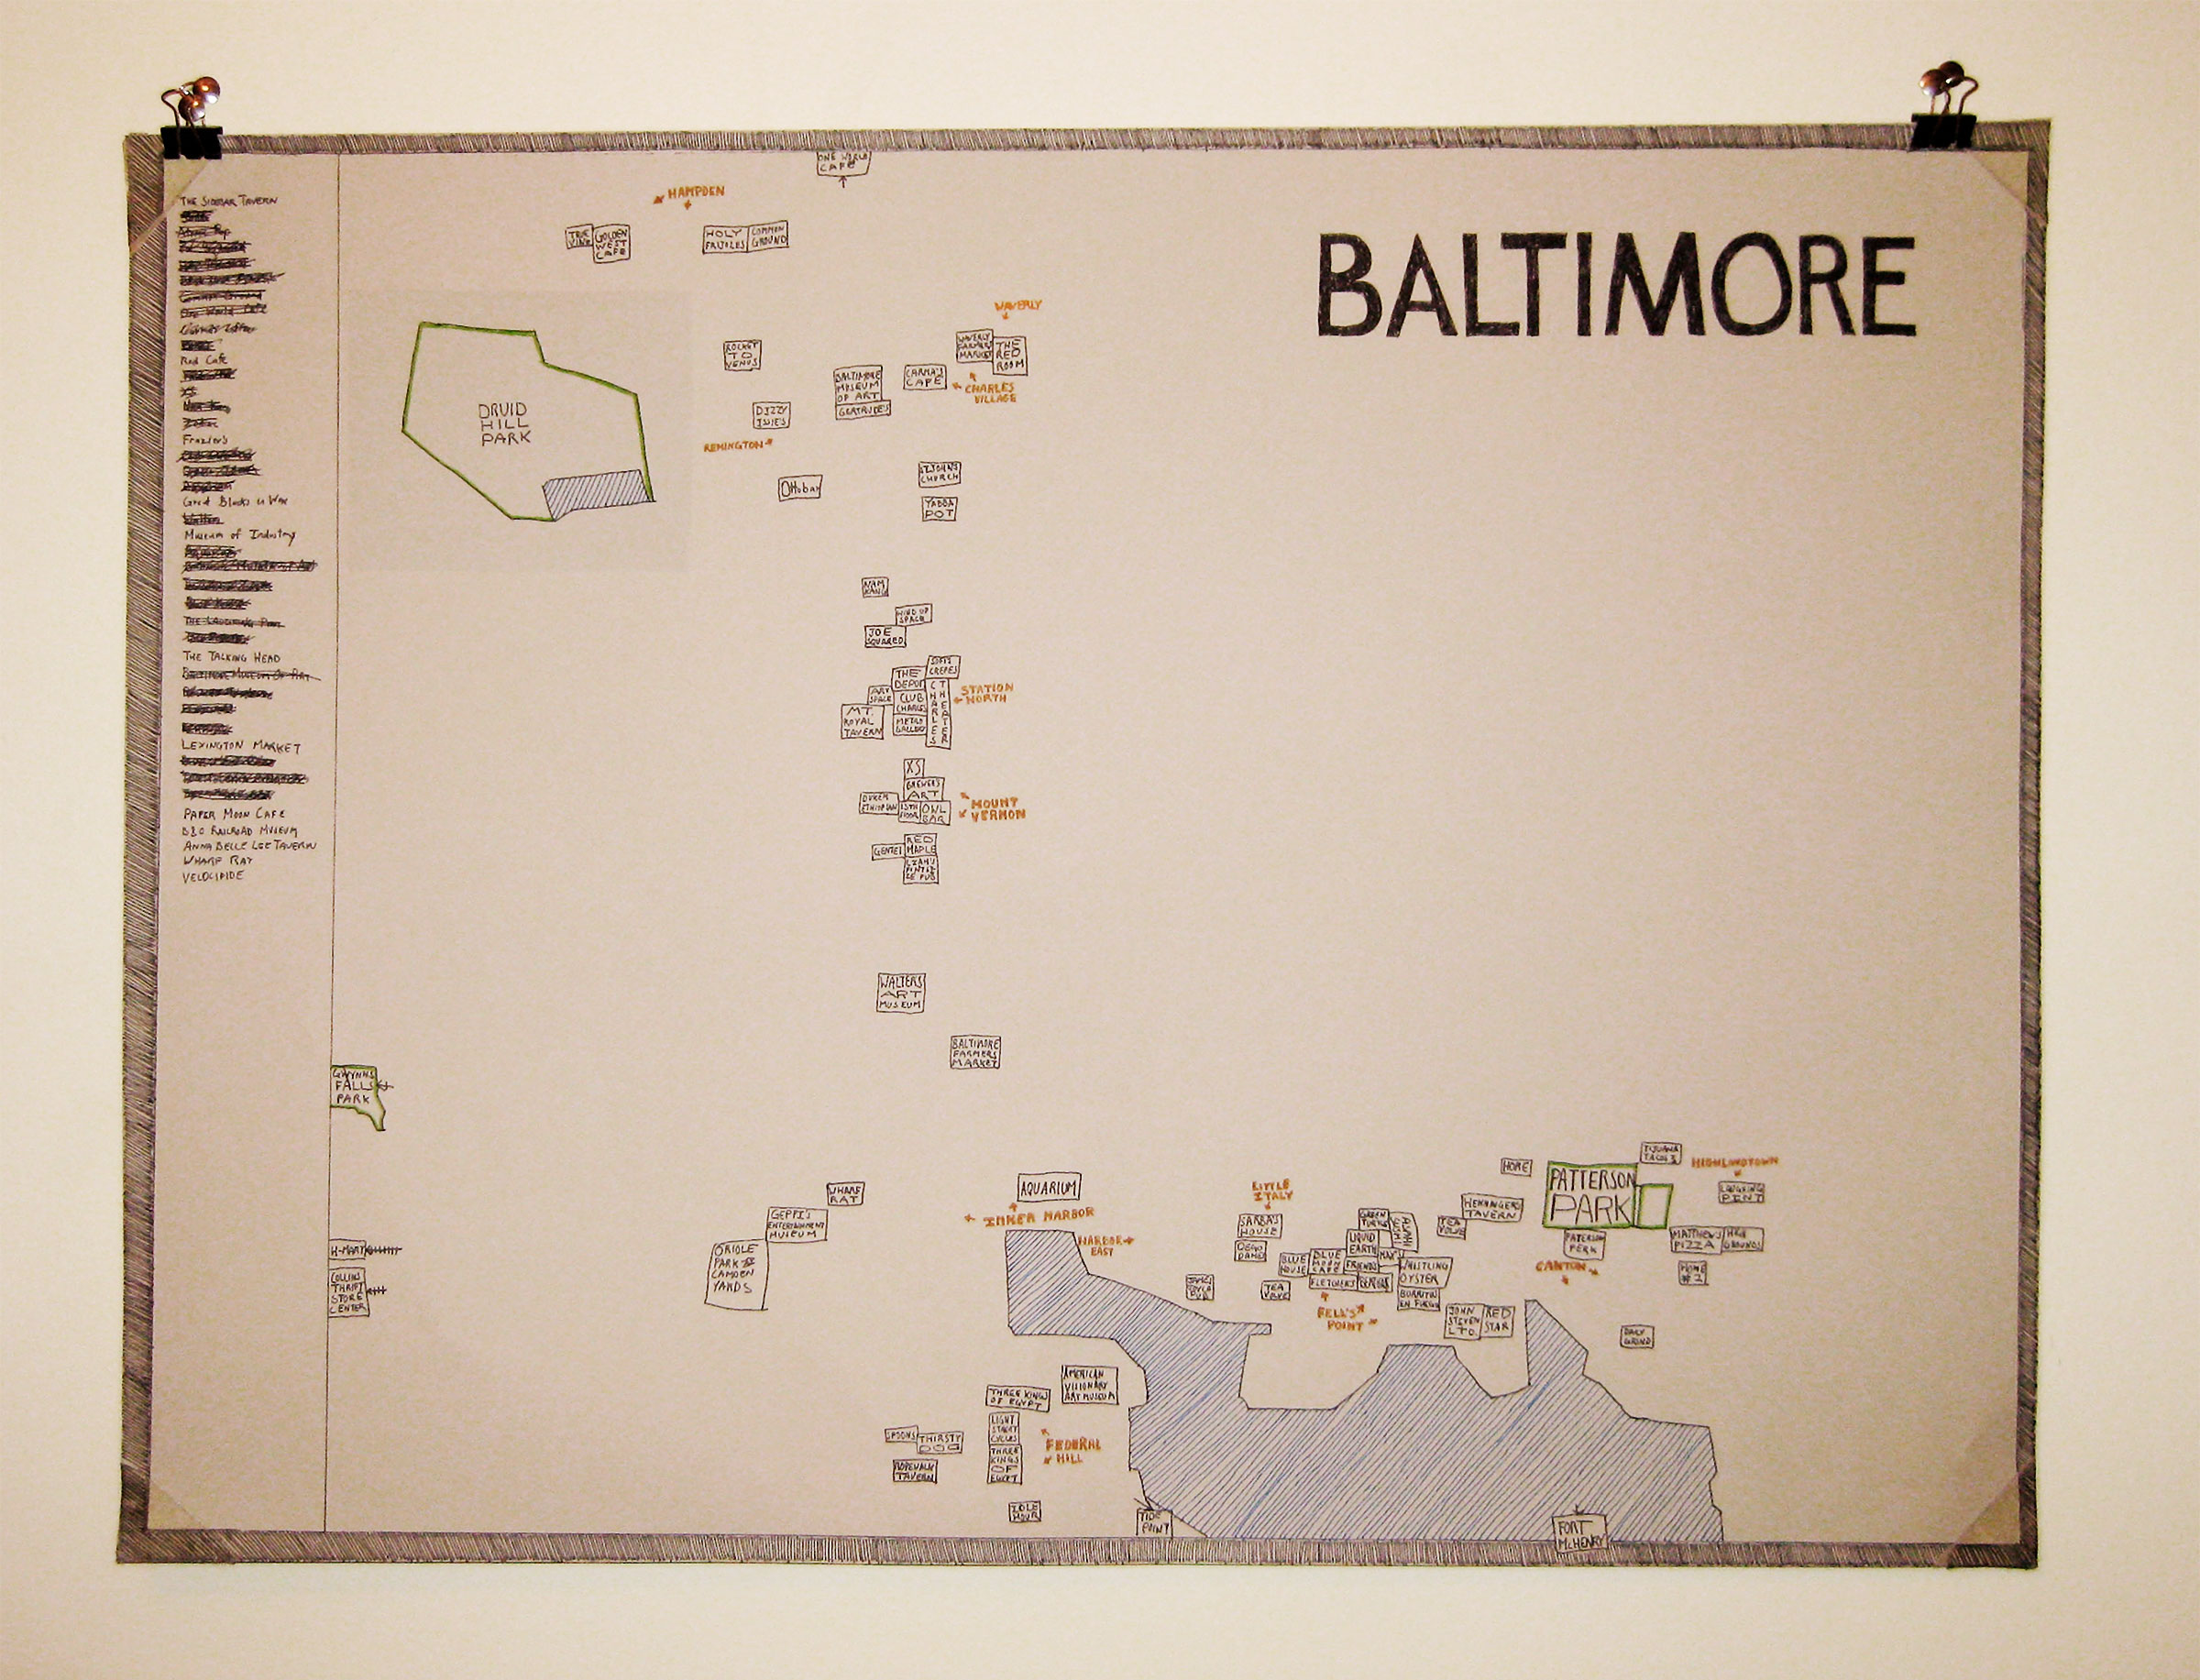 hand drawn map of baltimore showing different locations as small rectangles